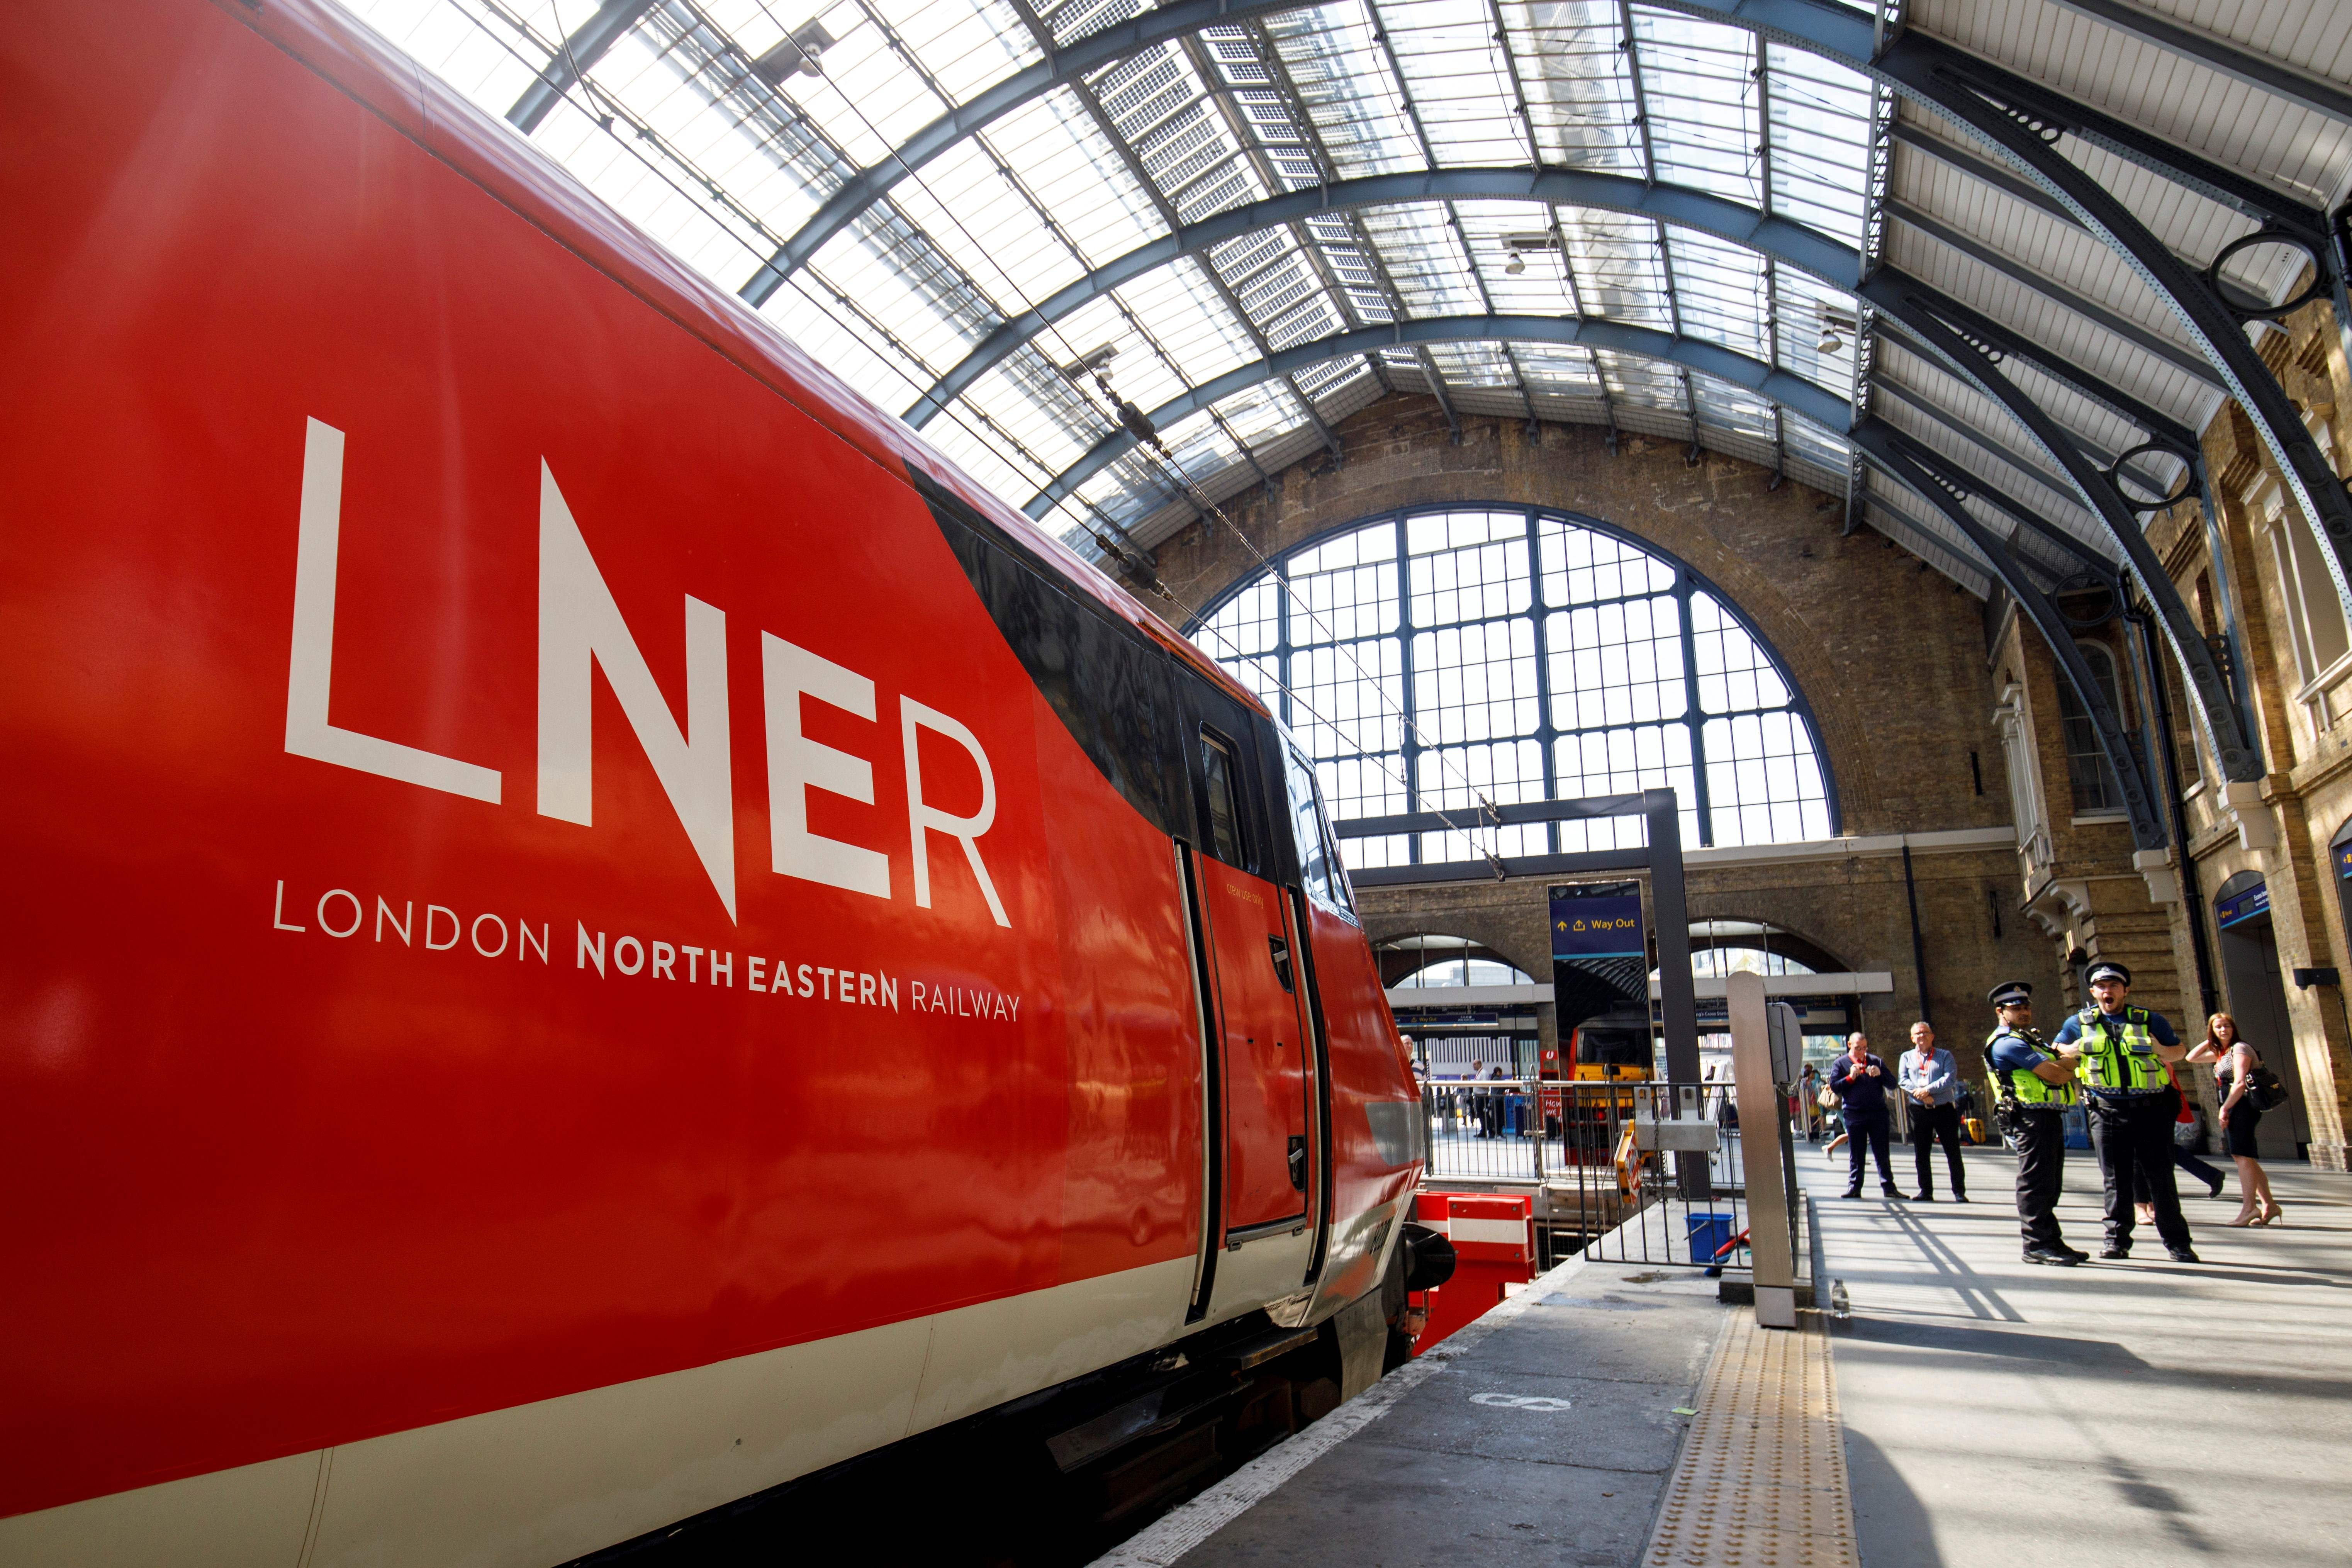 LNER has been in public ownership since 2018